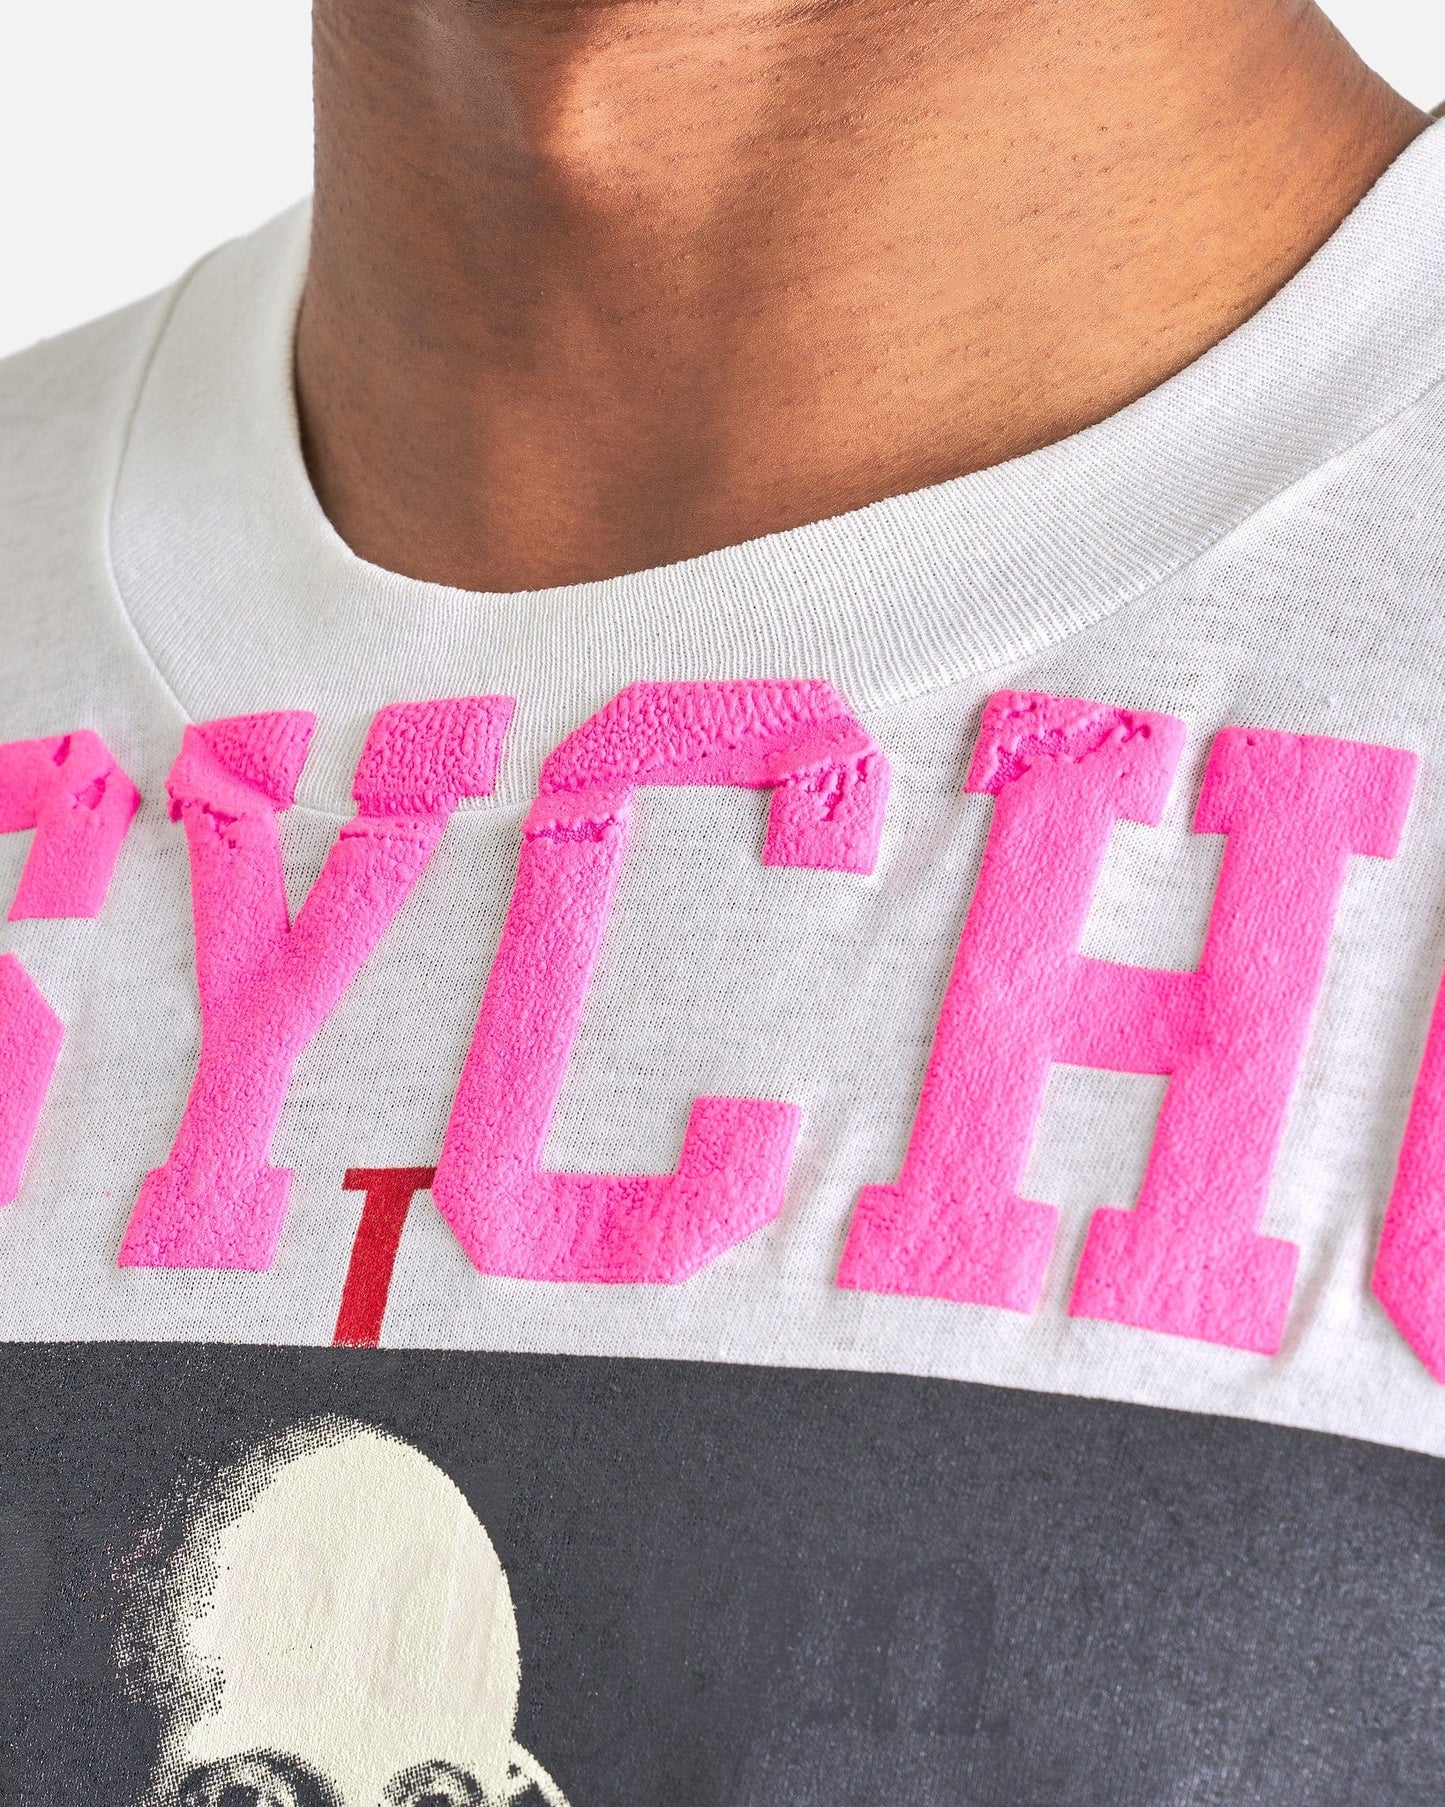 Better With Age Men's T-Shirts Psycho-Delic T-Shirt in Multi